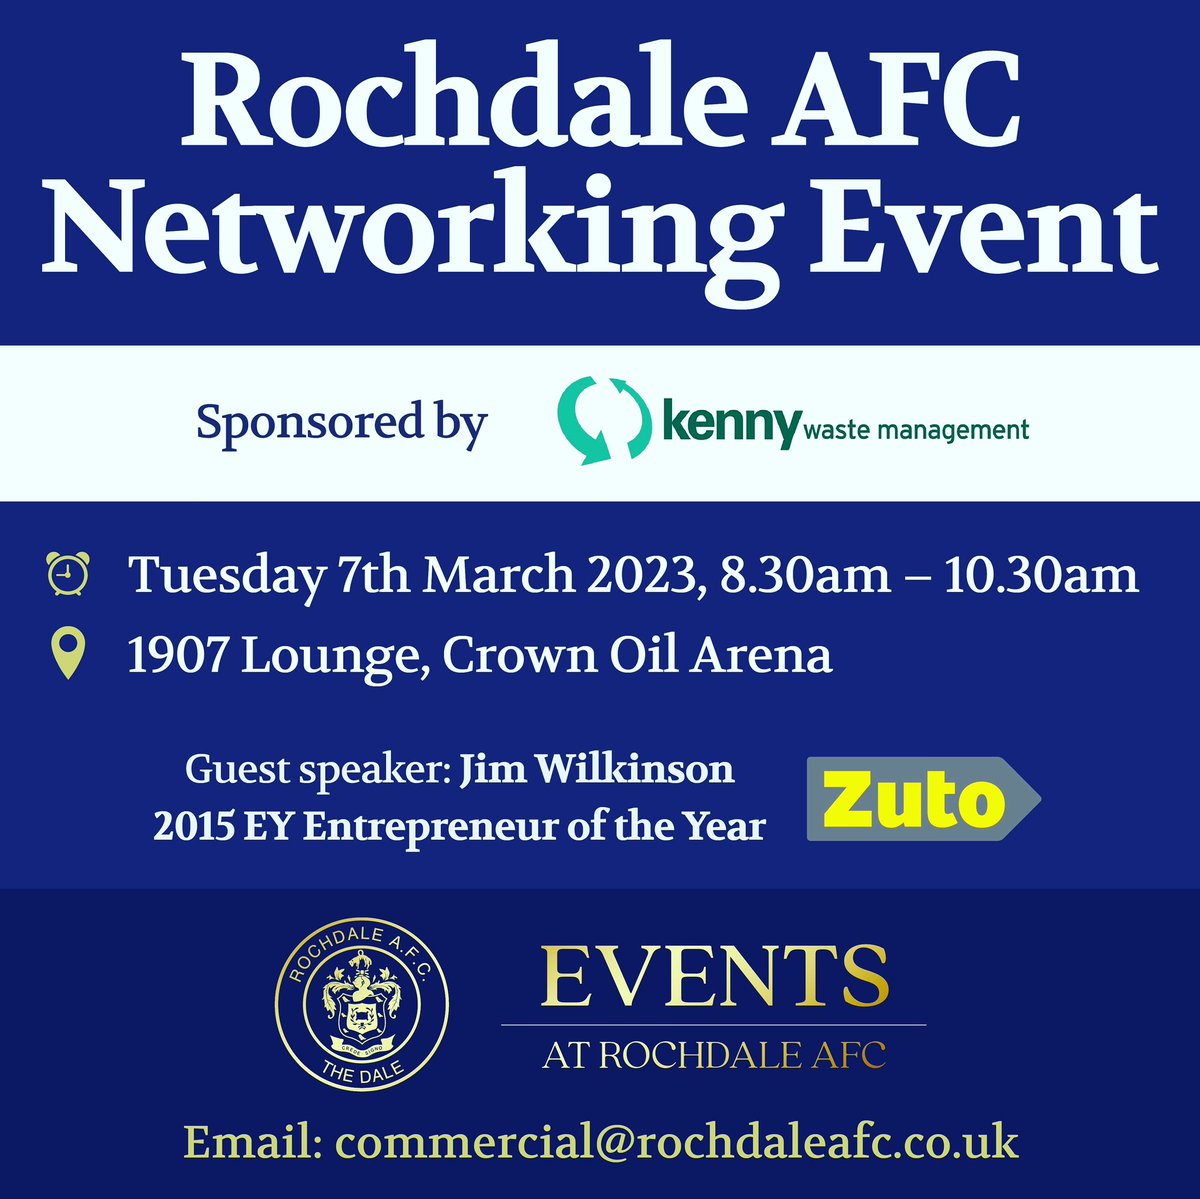 Networking Event 🤝 

Join us on 7 March to #network with some great local businesses and hear from our Sponsors @kennywaste 🚮 ♻️ 

Register your interest at at commercial@rochdaleafc.co.uk 📧 

#networking #rochdalebusiness #networkingevent #rafc #rochdalenetworking